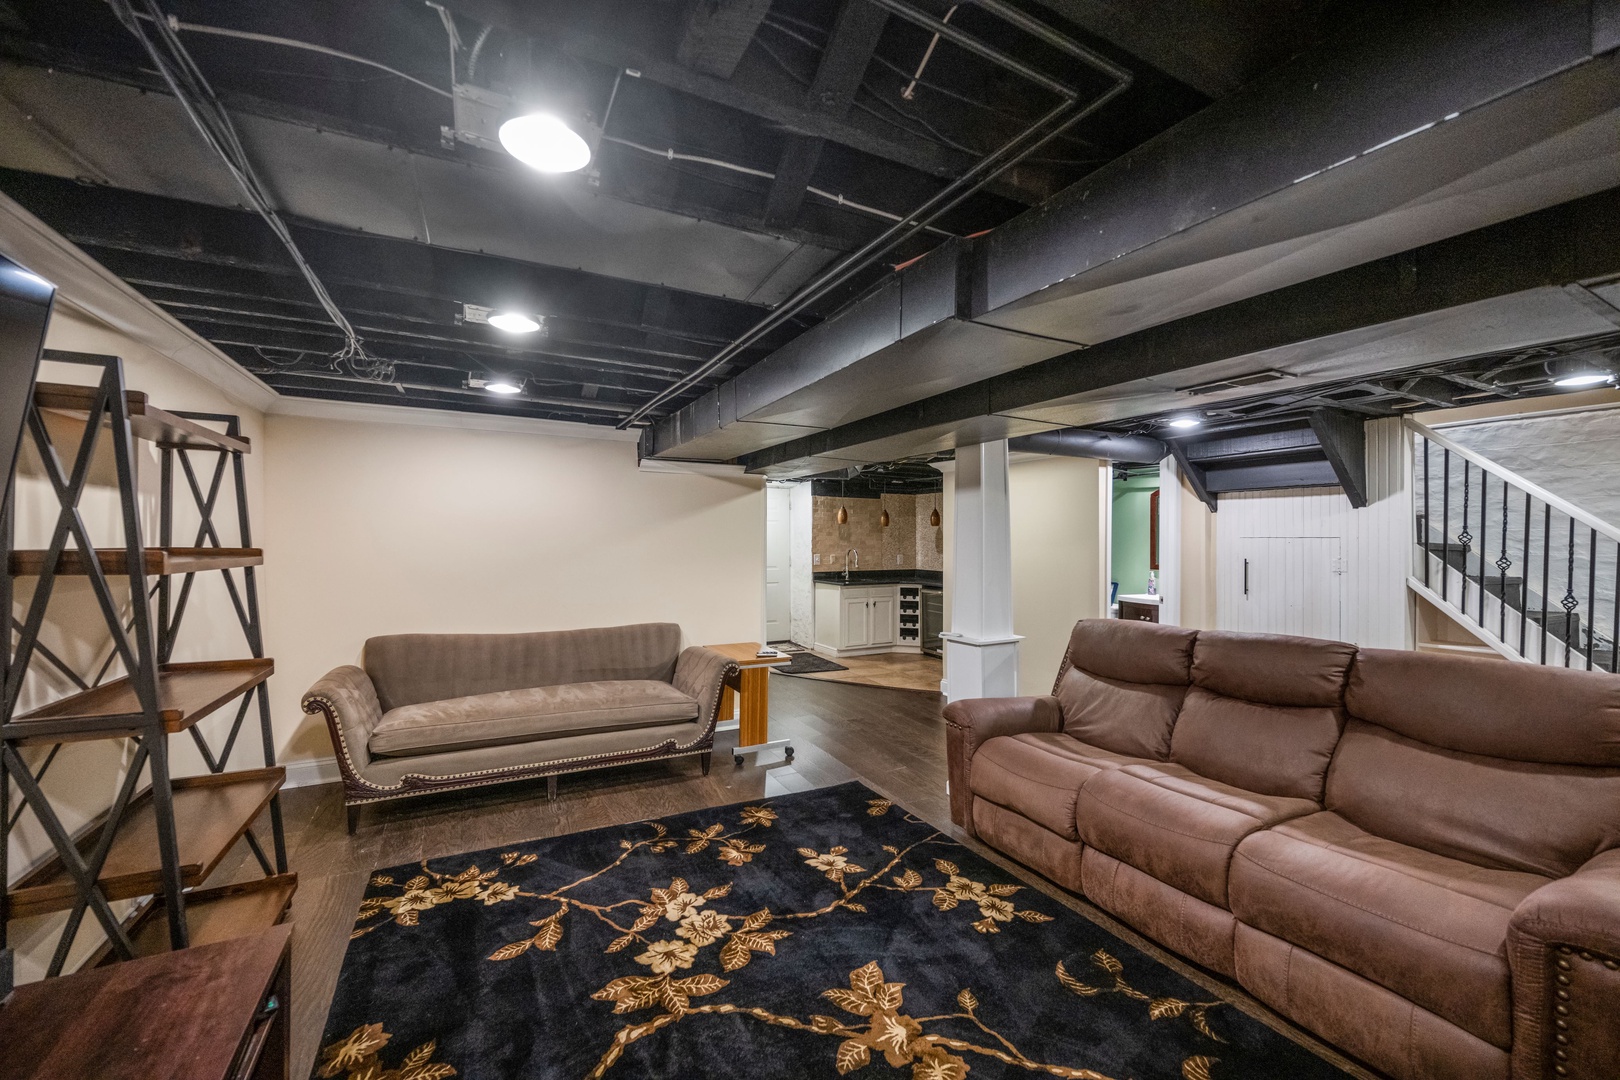 Curl up & enjoy a movie night at home in the lower-level living area